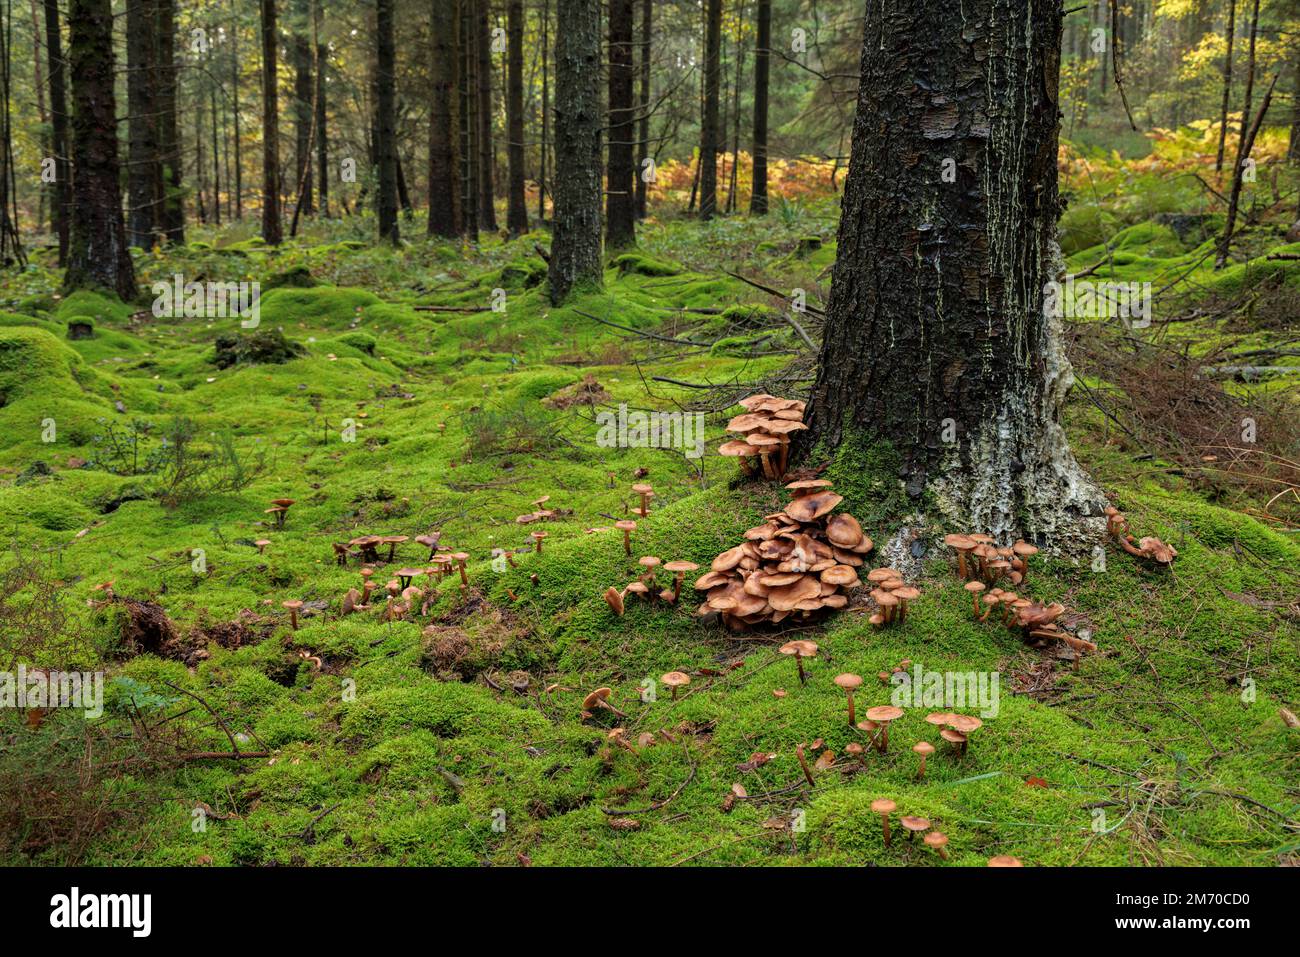 Reddish brown fungus growing at the base of a tree. Stock Photo